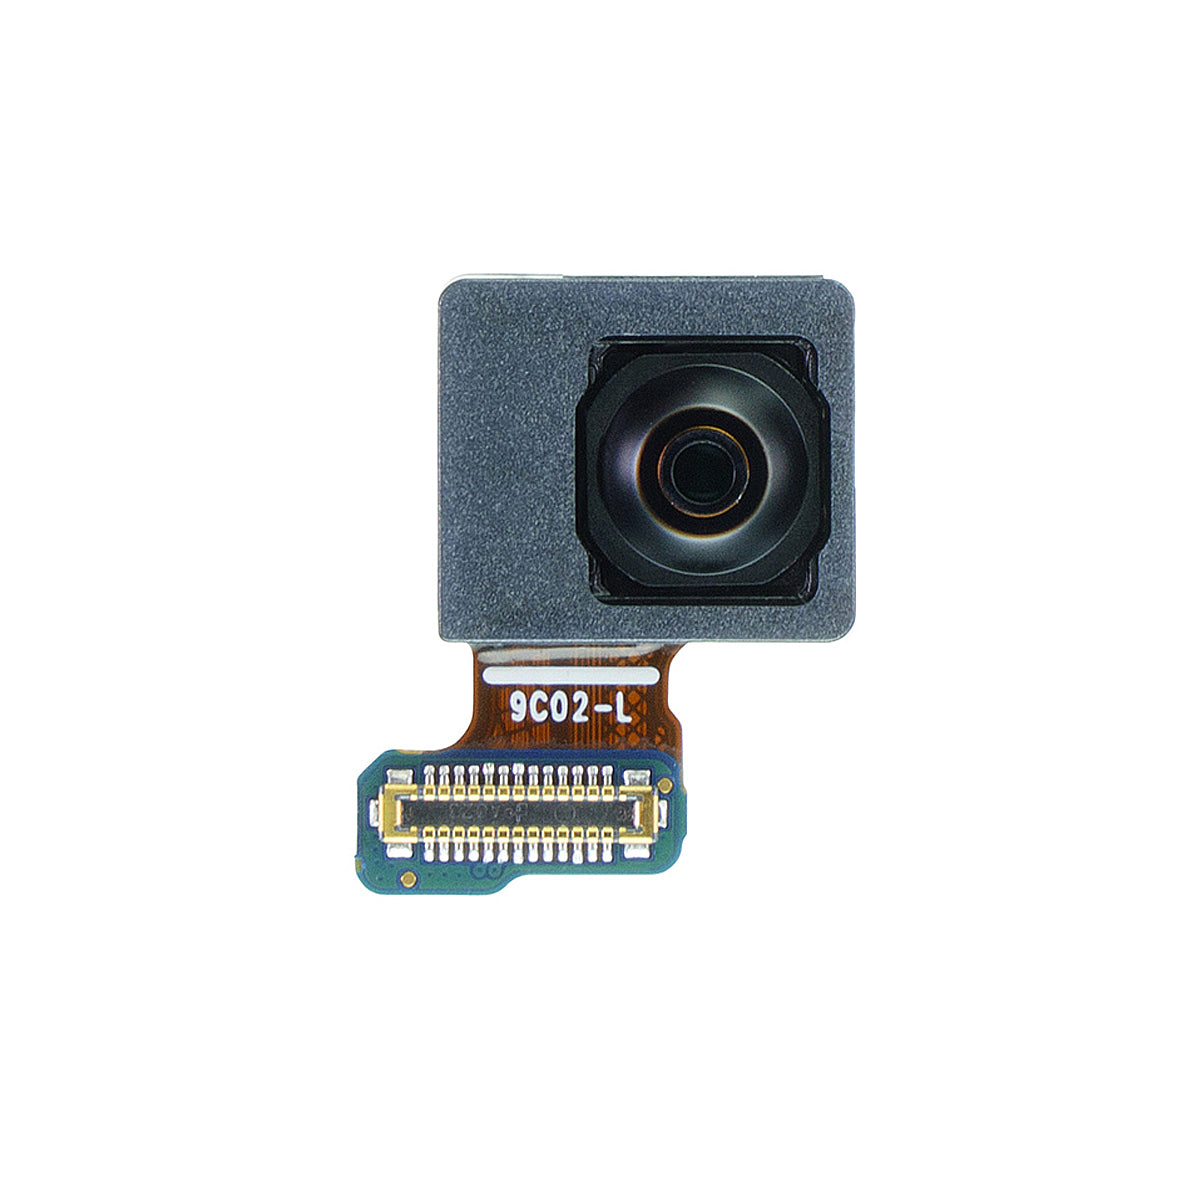 Front Camera Compatible For Samsung Galaxy S20, S20 Plus, Note 20 & Note 20 Ultra (North American Version)